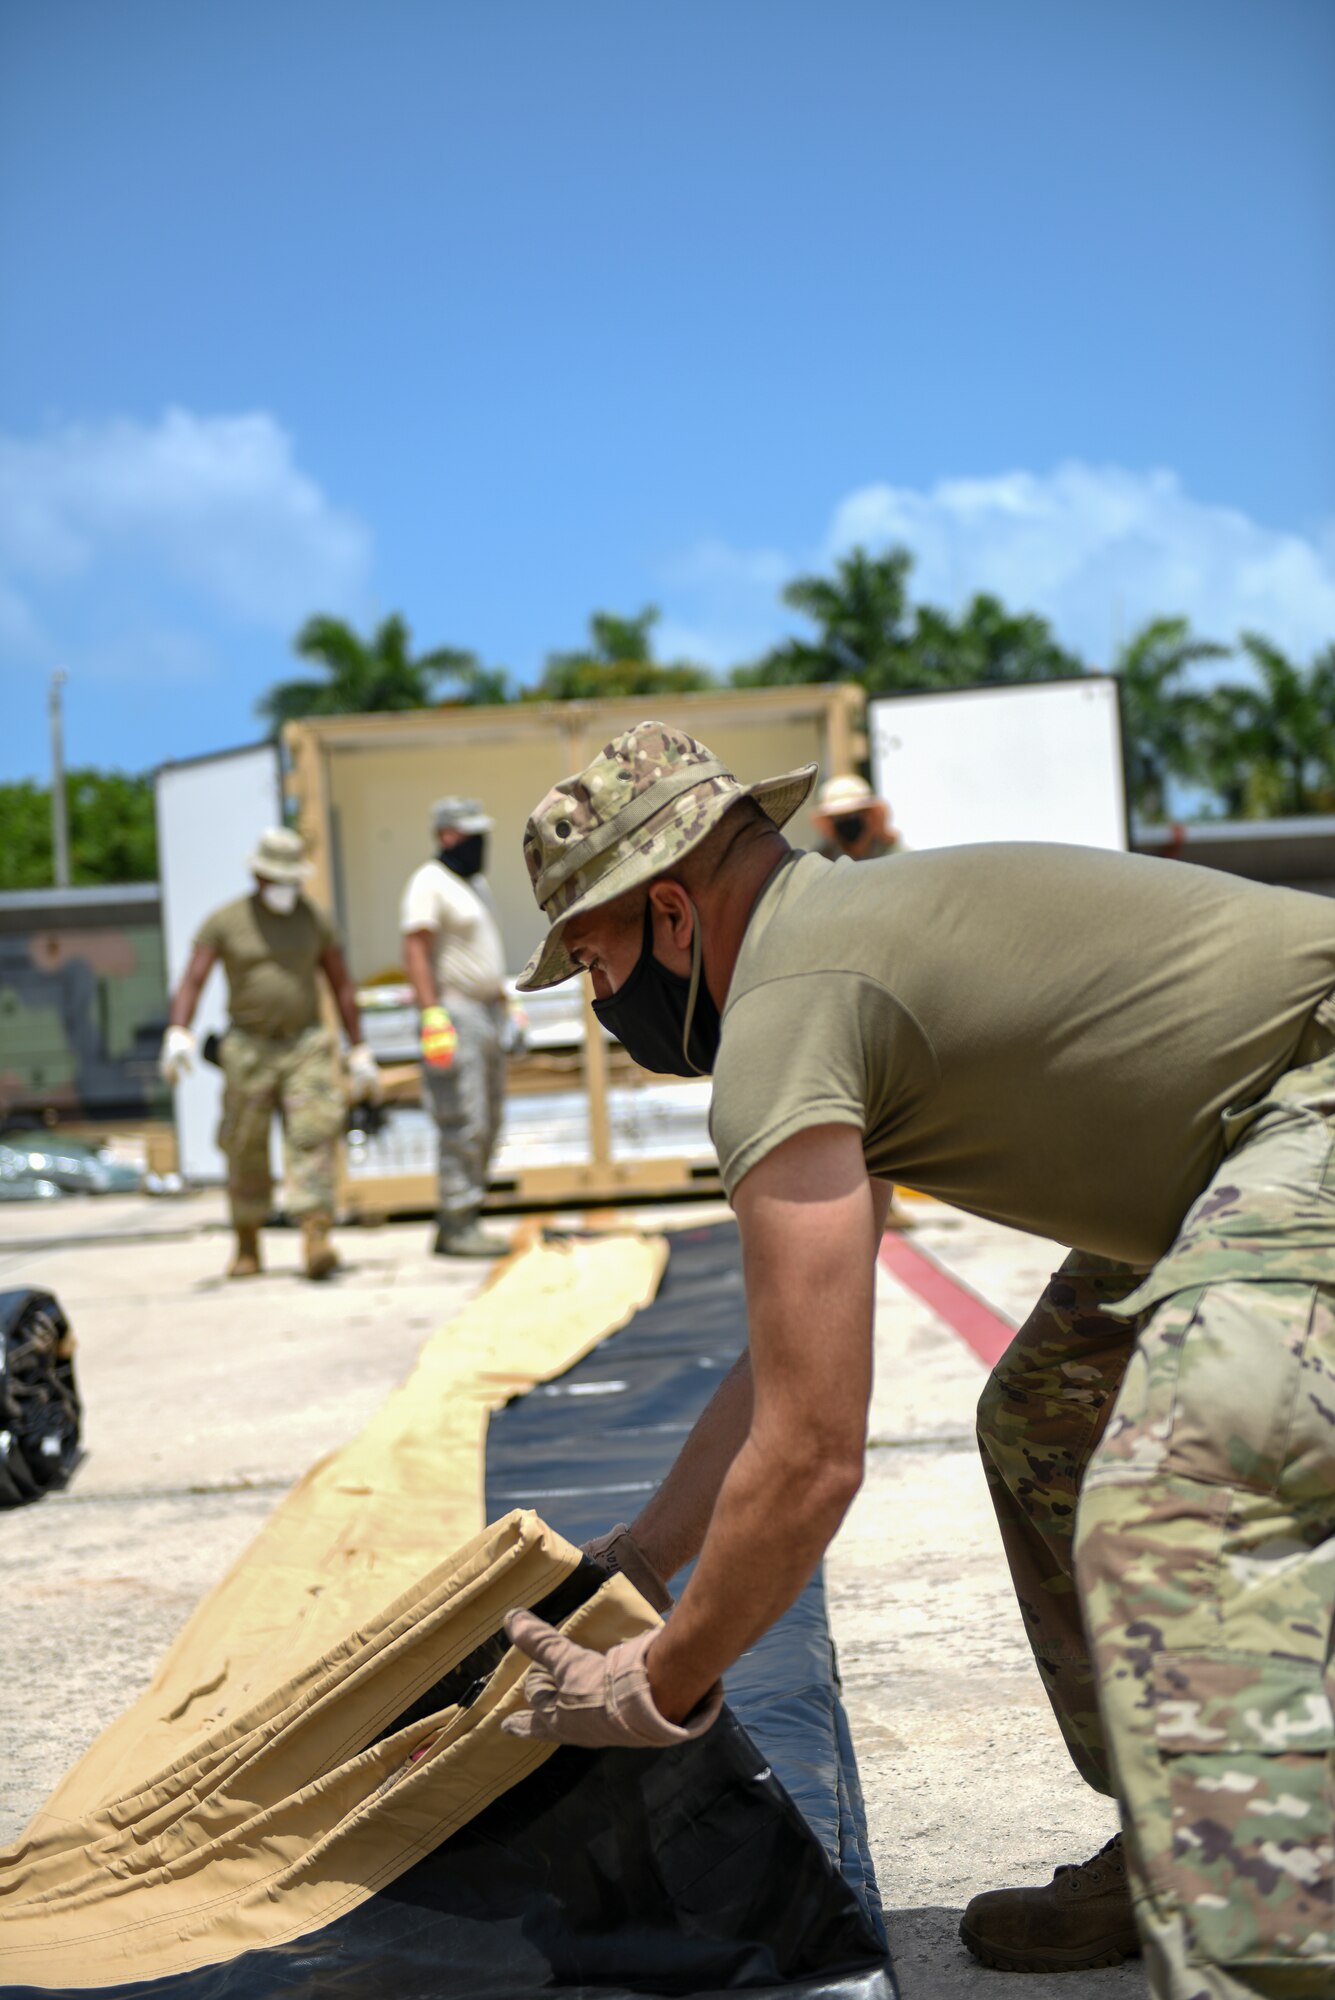 U.S. Airmen with the 156th Civil Engineer Squadron, Puerto Rico Air National Guard, set up tents and generators as part of a two week long training exercise on the Disaster Relief Beddown Systems at Muñiz Air National Guard Base, Aug. 18, 2020. Specialized Airmen from the New Mexico ANG, Arkansas ANG, Pennsylvania ANG, North Carolina ANG, Iowa ANG and Colorado ANG arrived at Muñiz to train Puerto Rico National Guard Airmen and Soldiers on how to properly assemble, operate, inventory and disassemble the DRBS equipment. (U.S. Air National Guard photo by Tech. Sgt. Rafael D. Rosa)